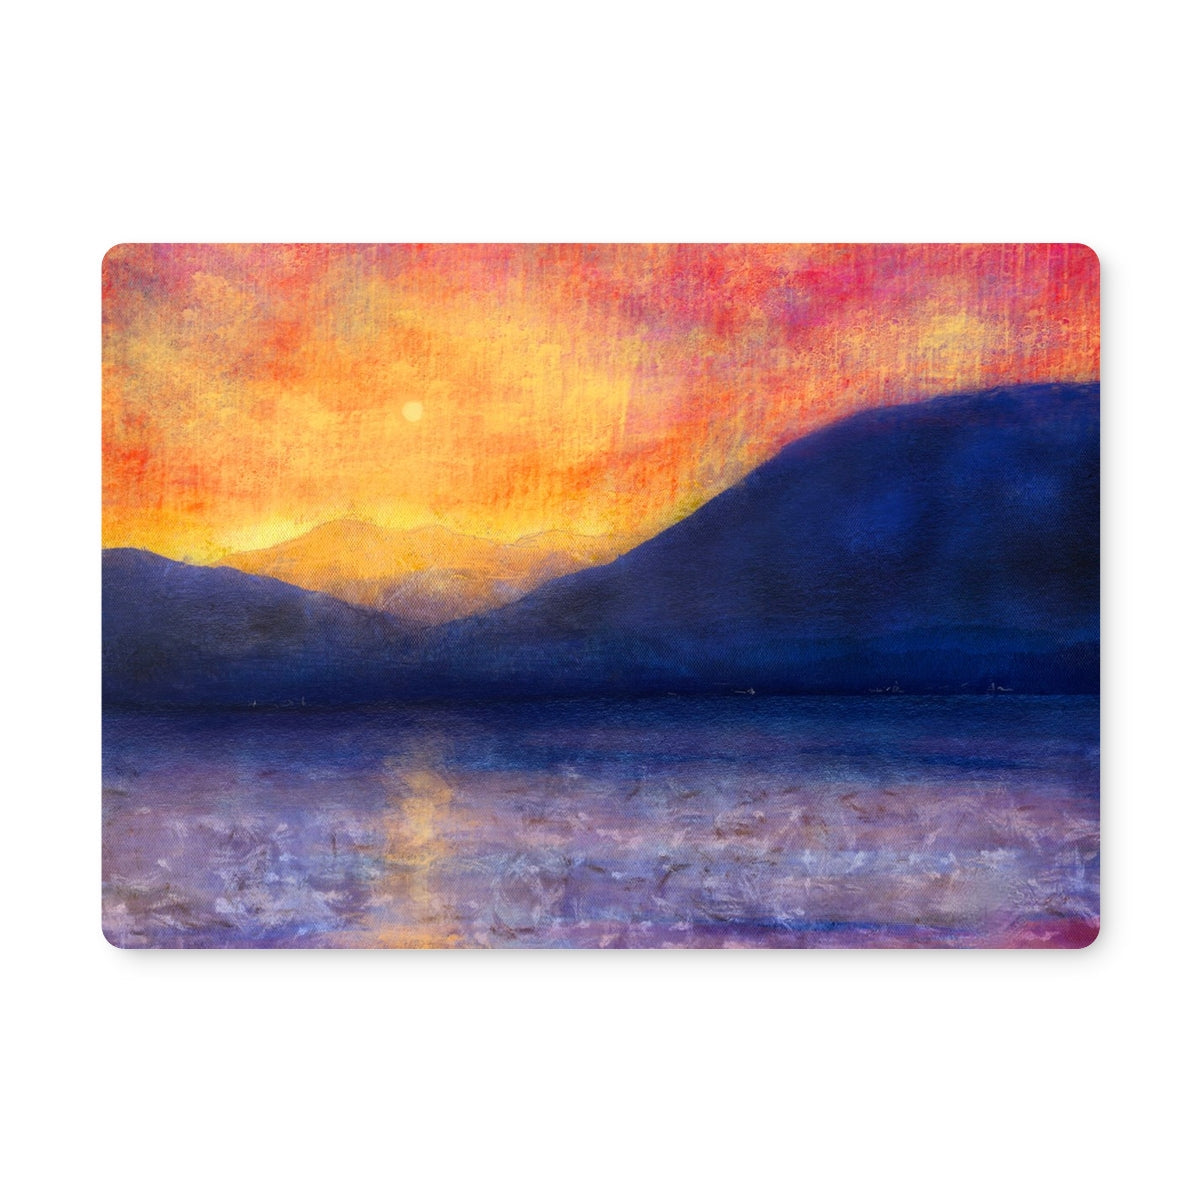 Sunset Approaching Mull Art Gifts Placemat-Placemats-Hebridean Islands Art Gallery-Single Placemat-Paintings, Prints, Homeware, Art Gifts From Scotland By Scottish Artist Kevin Hunter